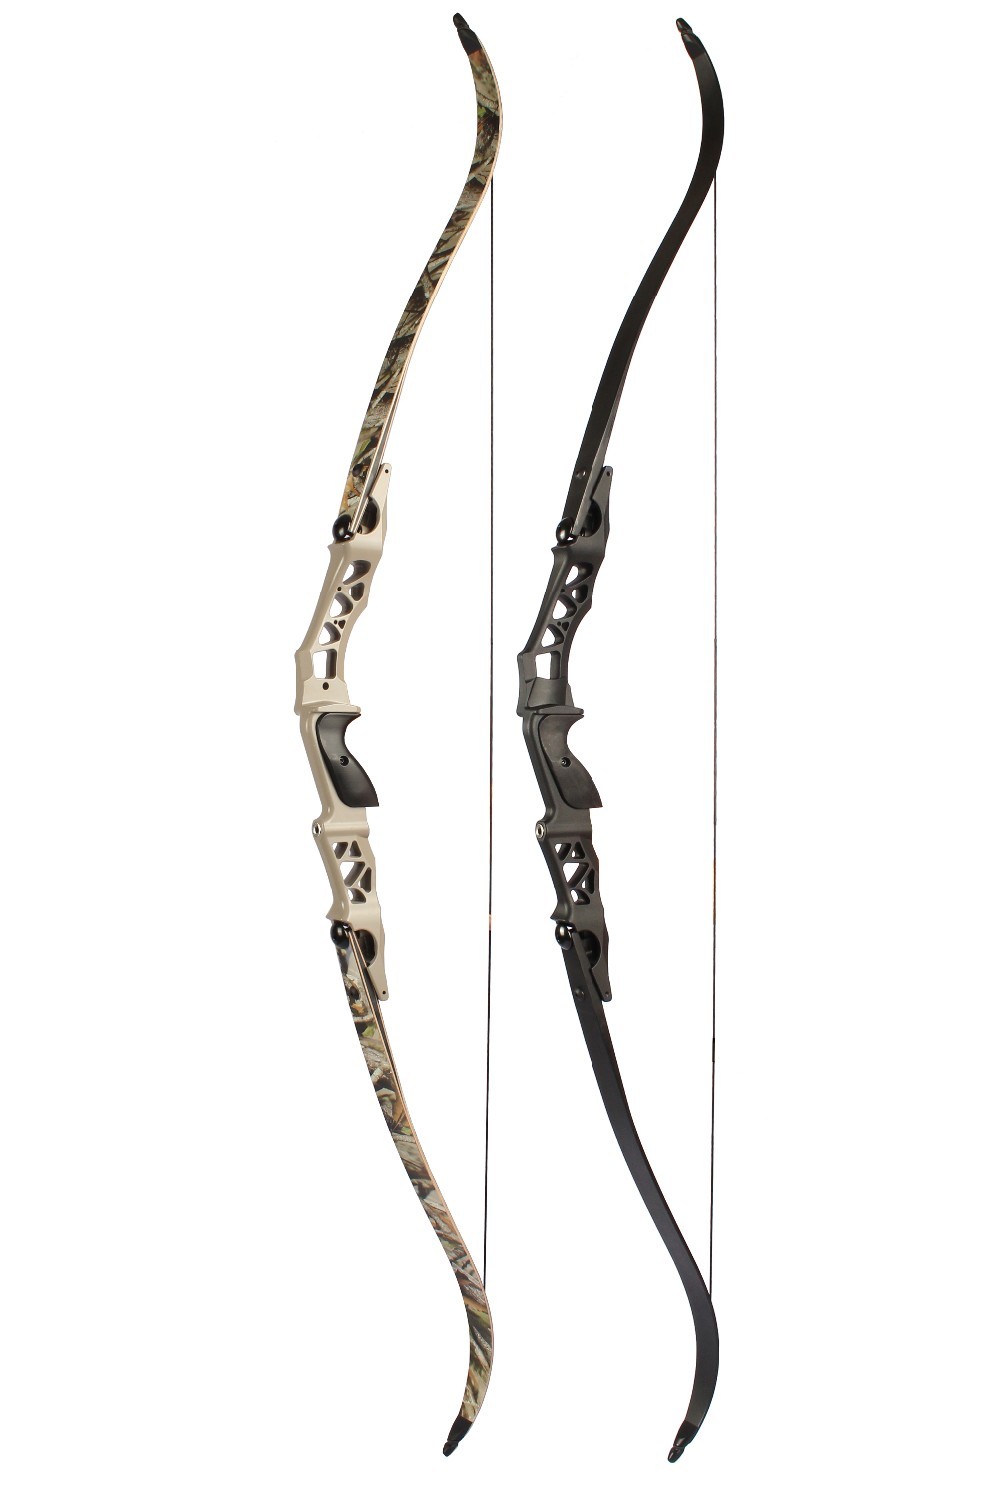 How To Get The Most Out Of Your Junxing M021 Compound Bow